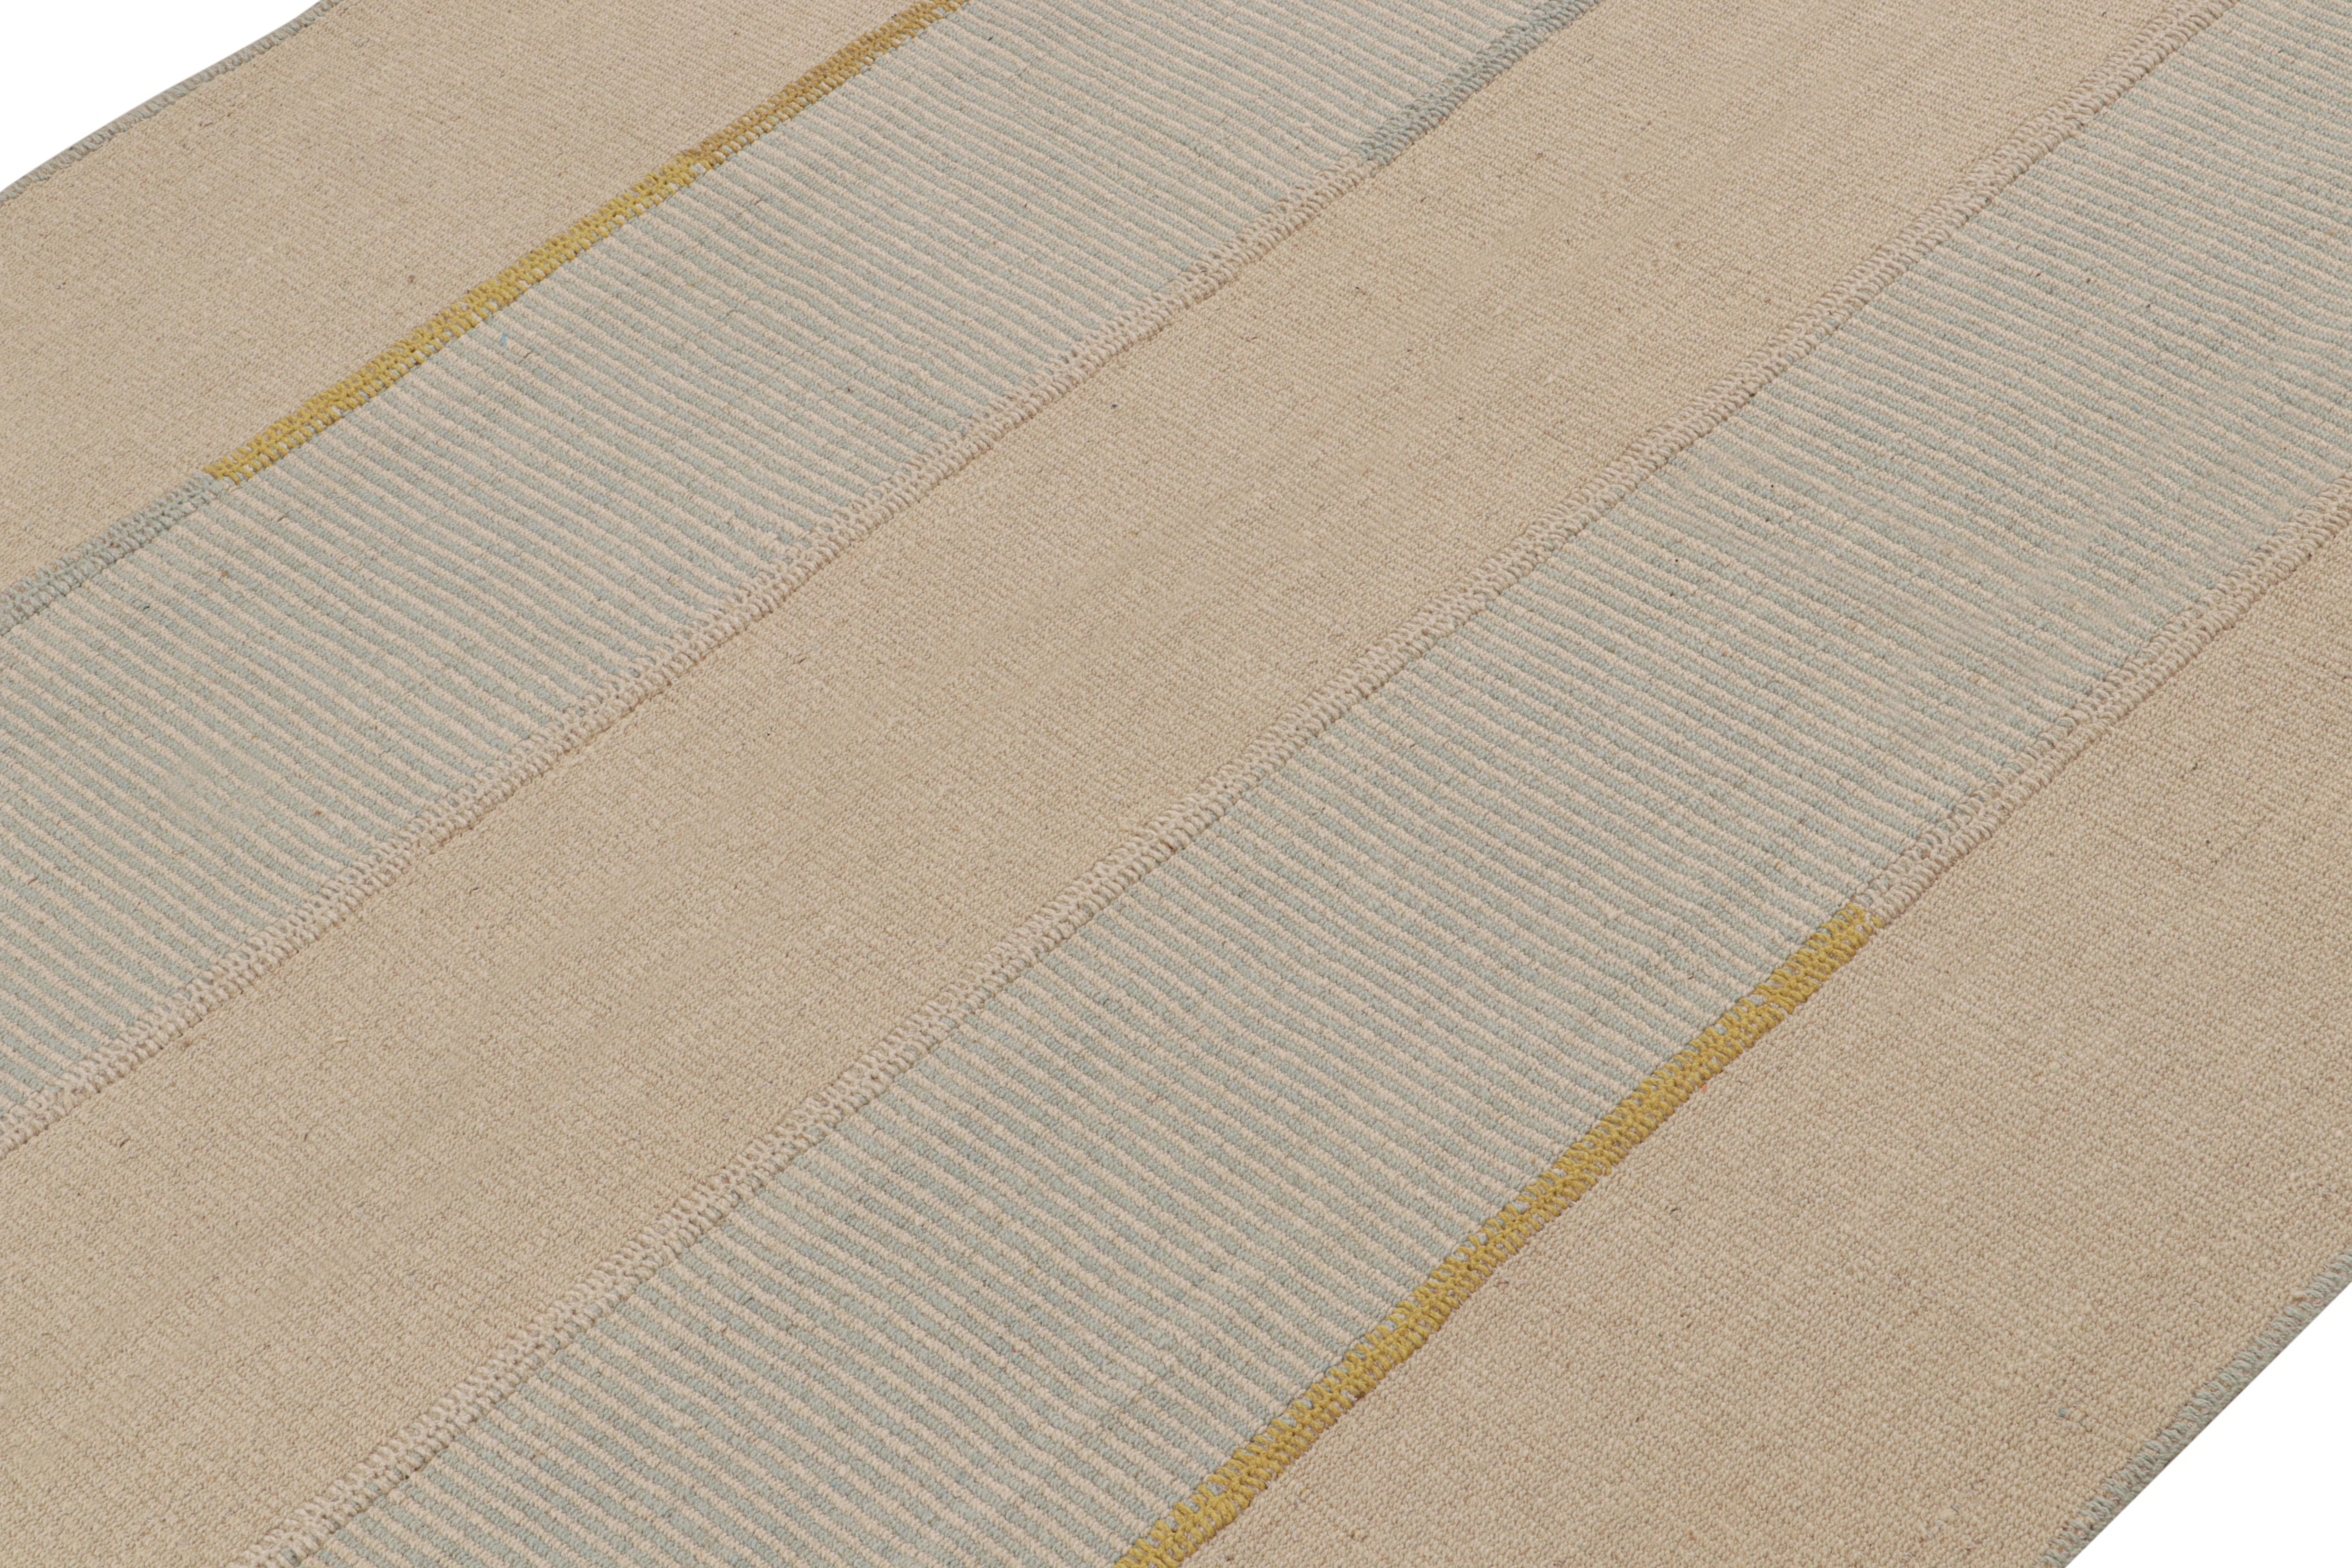 Handwoven in wool, this 7x9 Kilim os from a bold new line of contemporary flatweaves by Rug & Kilim.

On the Design: 

Connoting a modern take on Classic panel-weaving, our latest “Rez Kilim” enjoys beige, blue and gold tones with a cream accent.